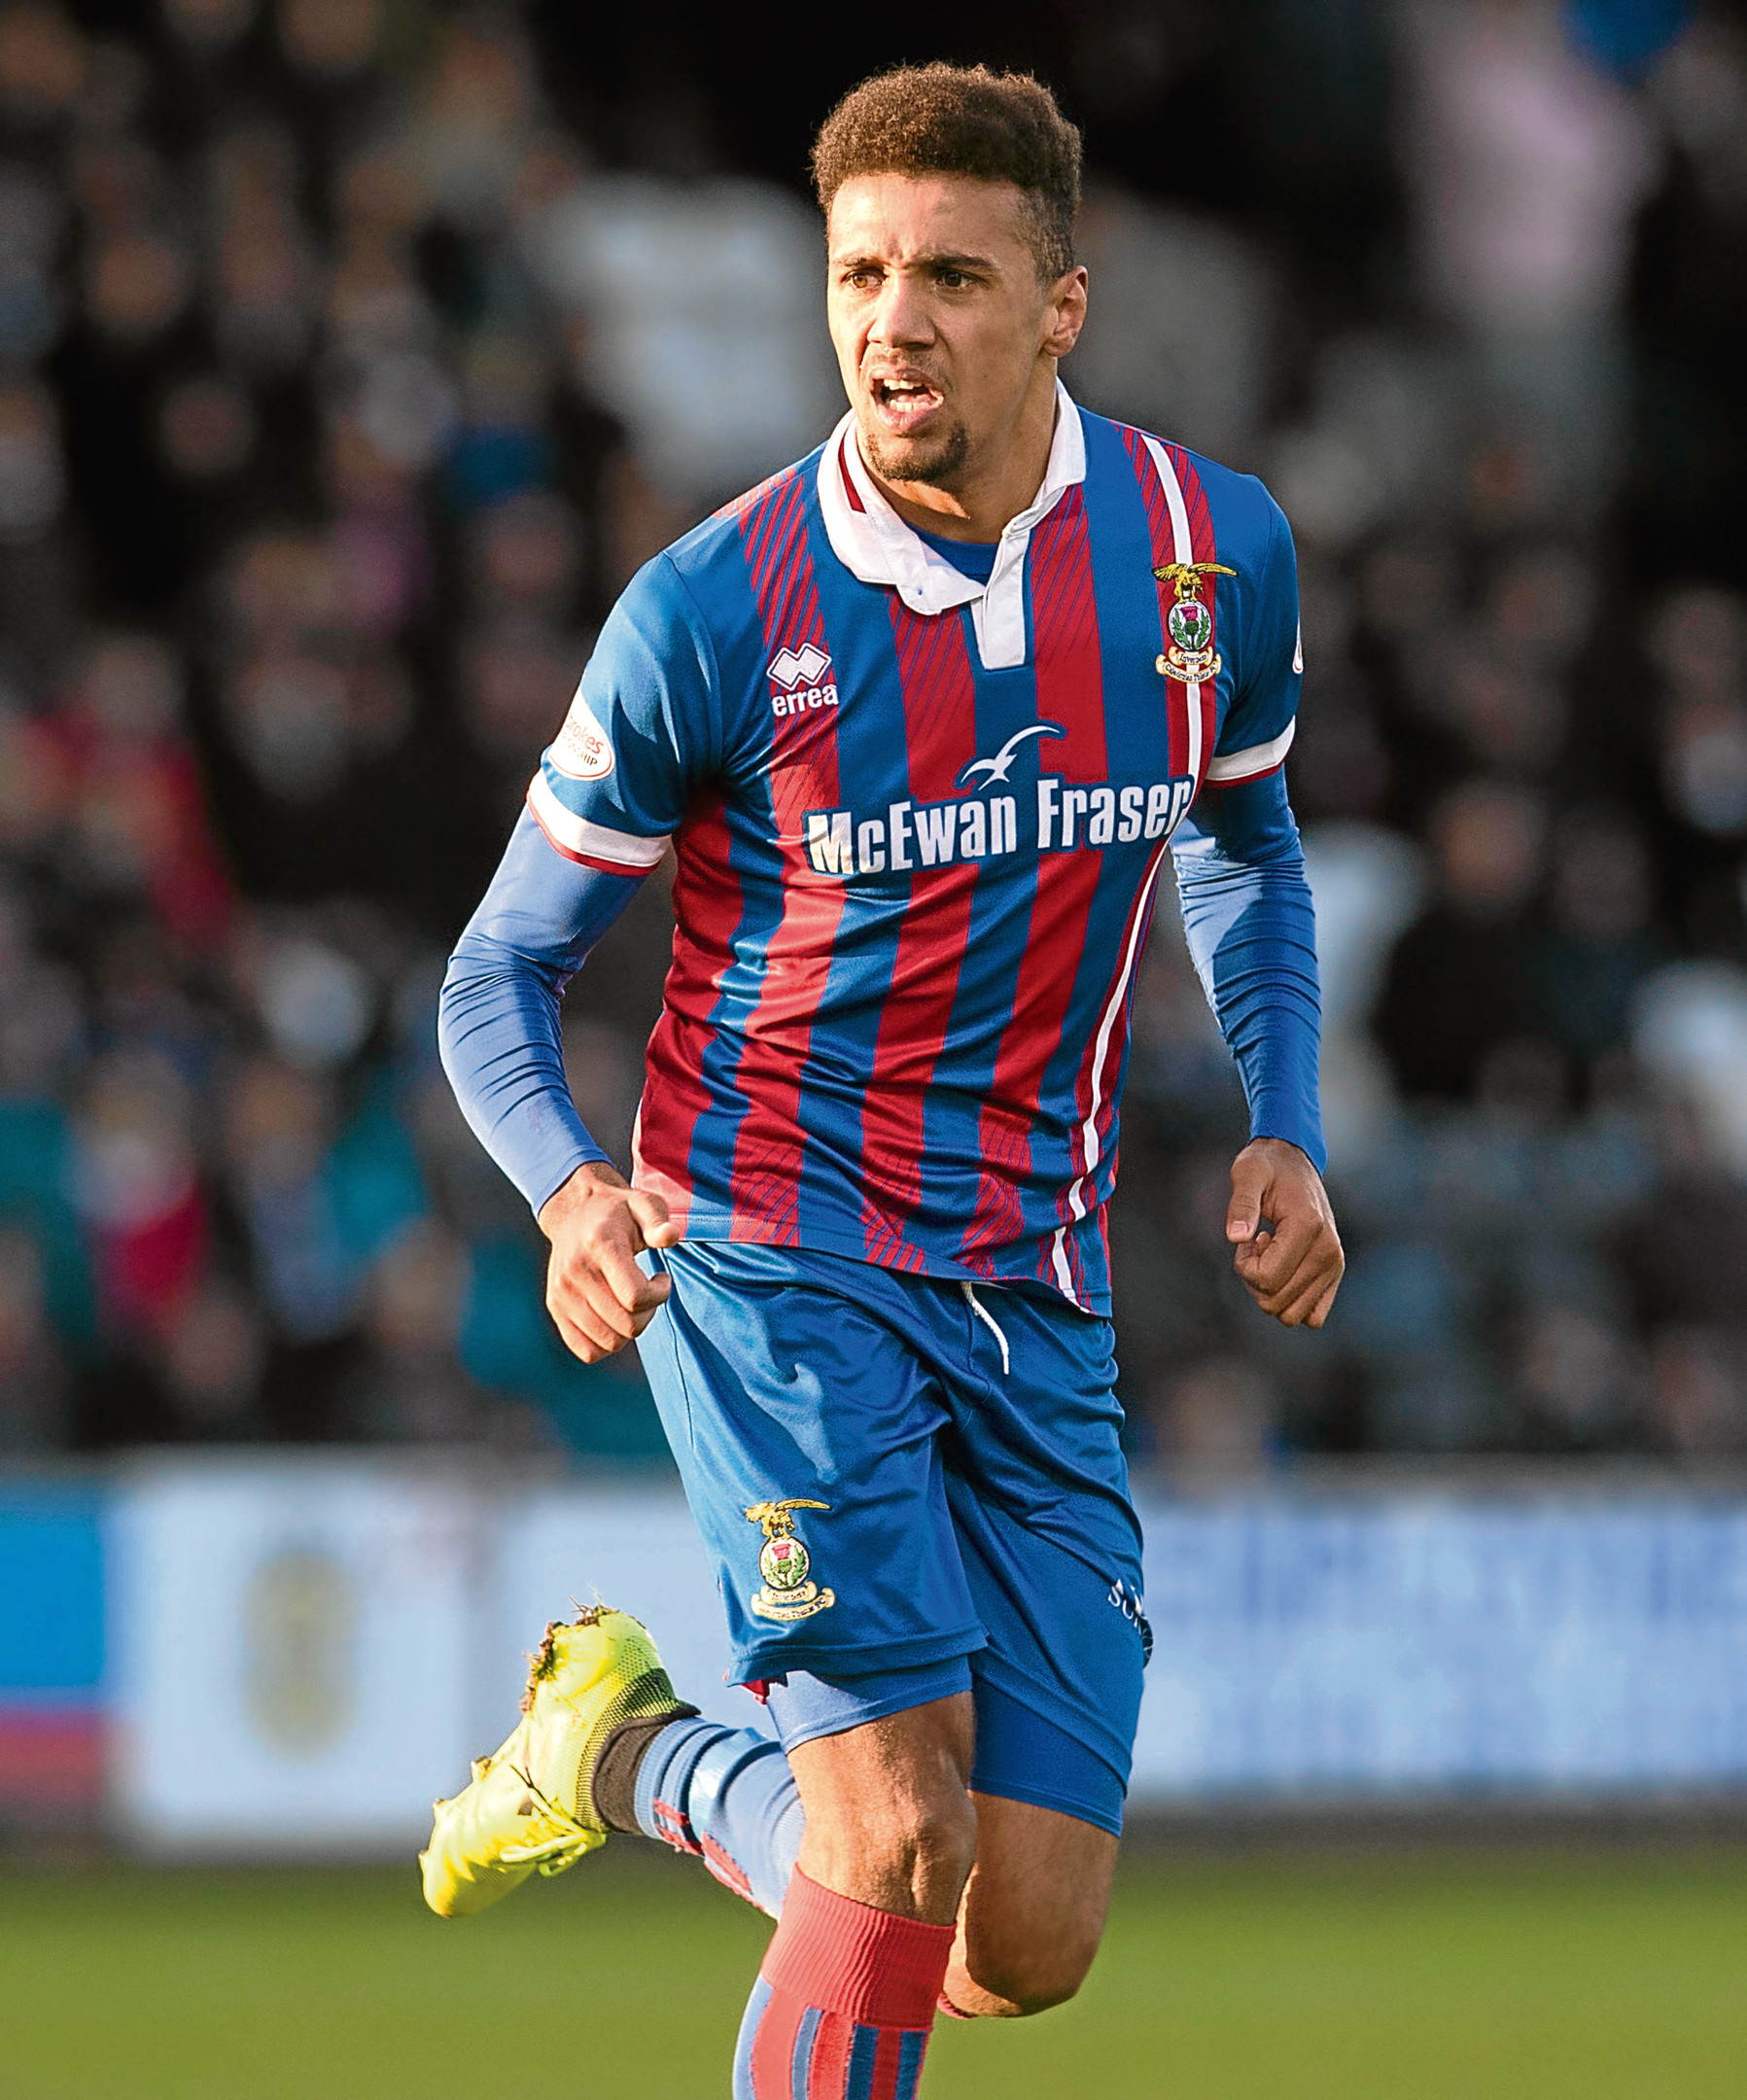 Nathan Austin levelled the scores for Caley Thistle.